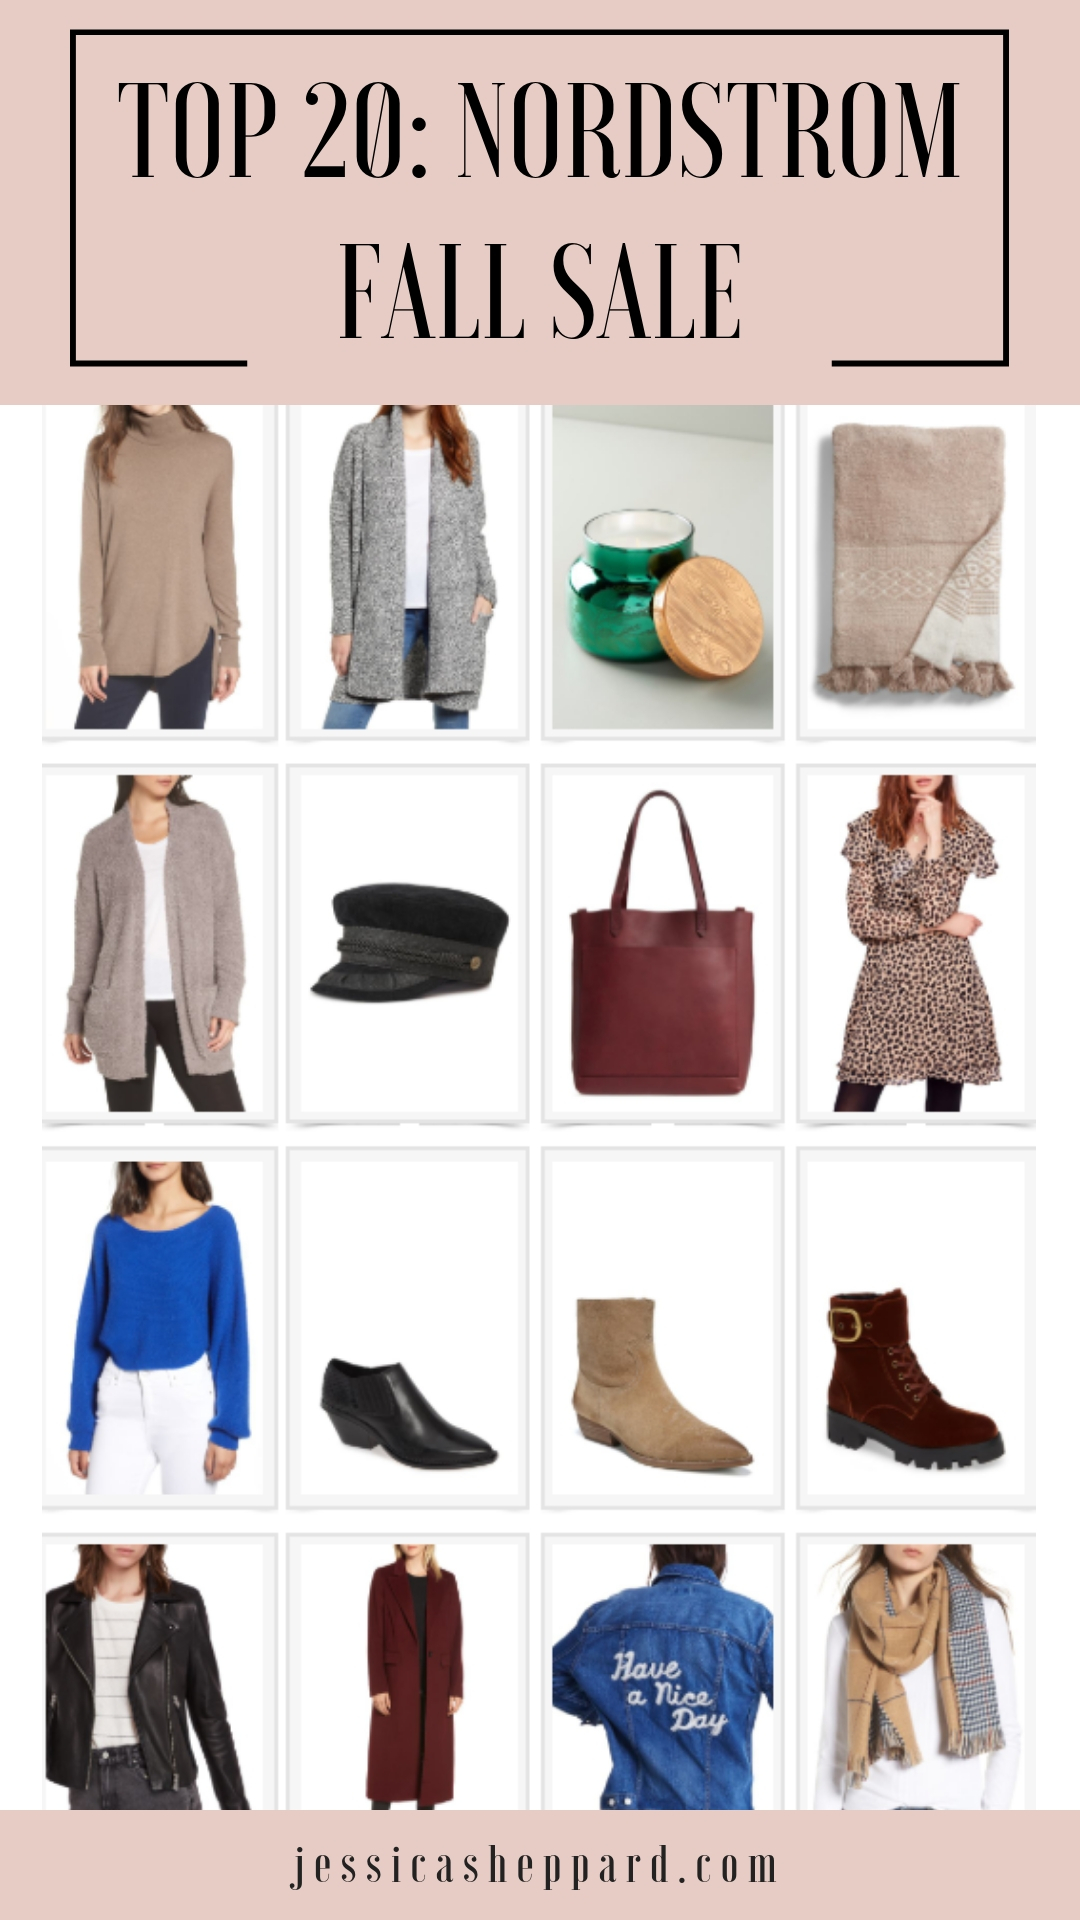 TOP 20: Best of Nordstrom Fall Sale — Jessica Sheppard